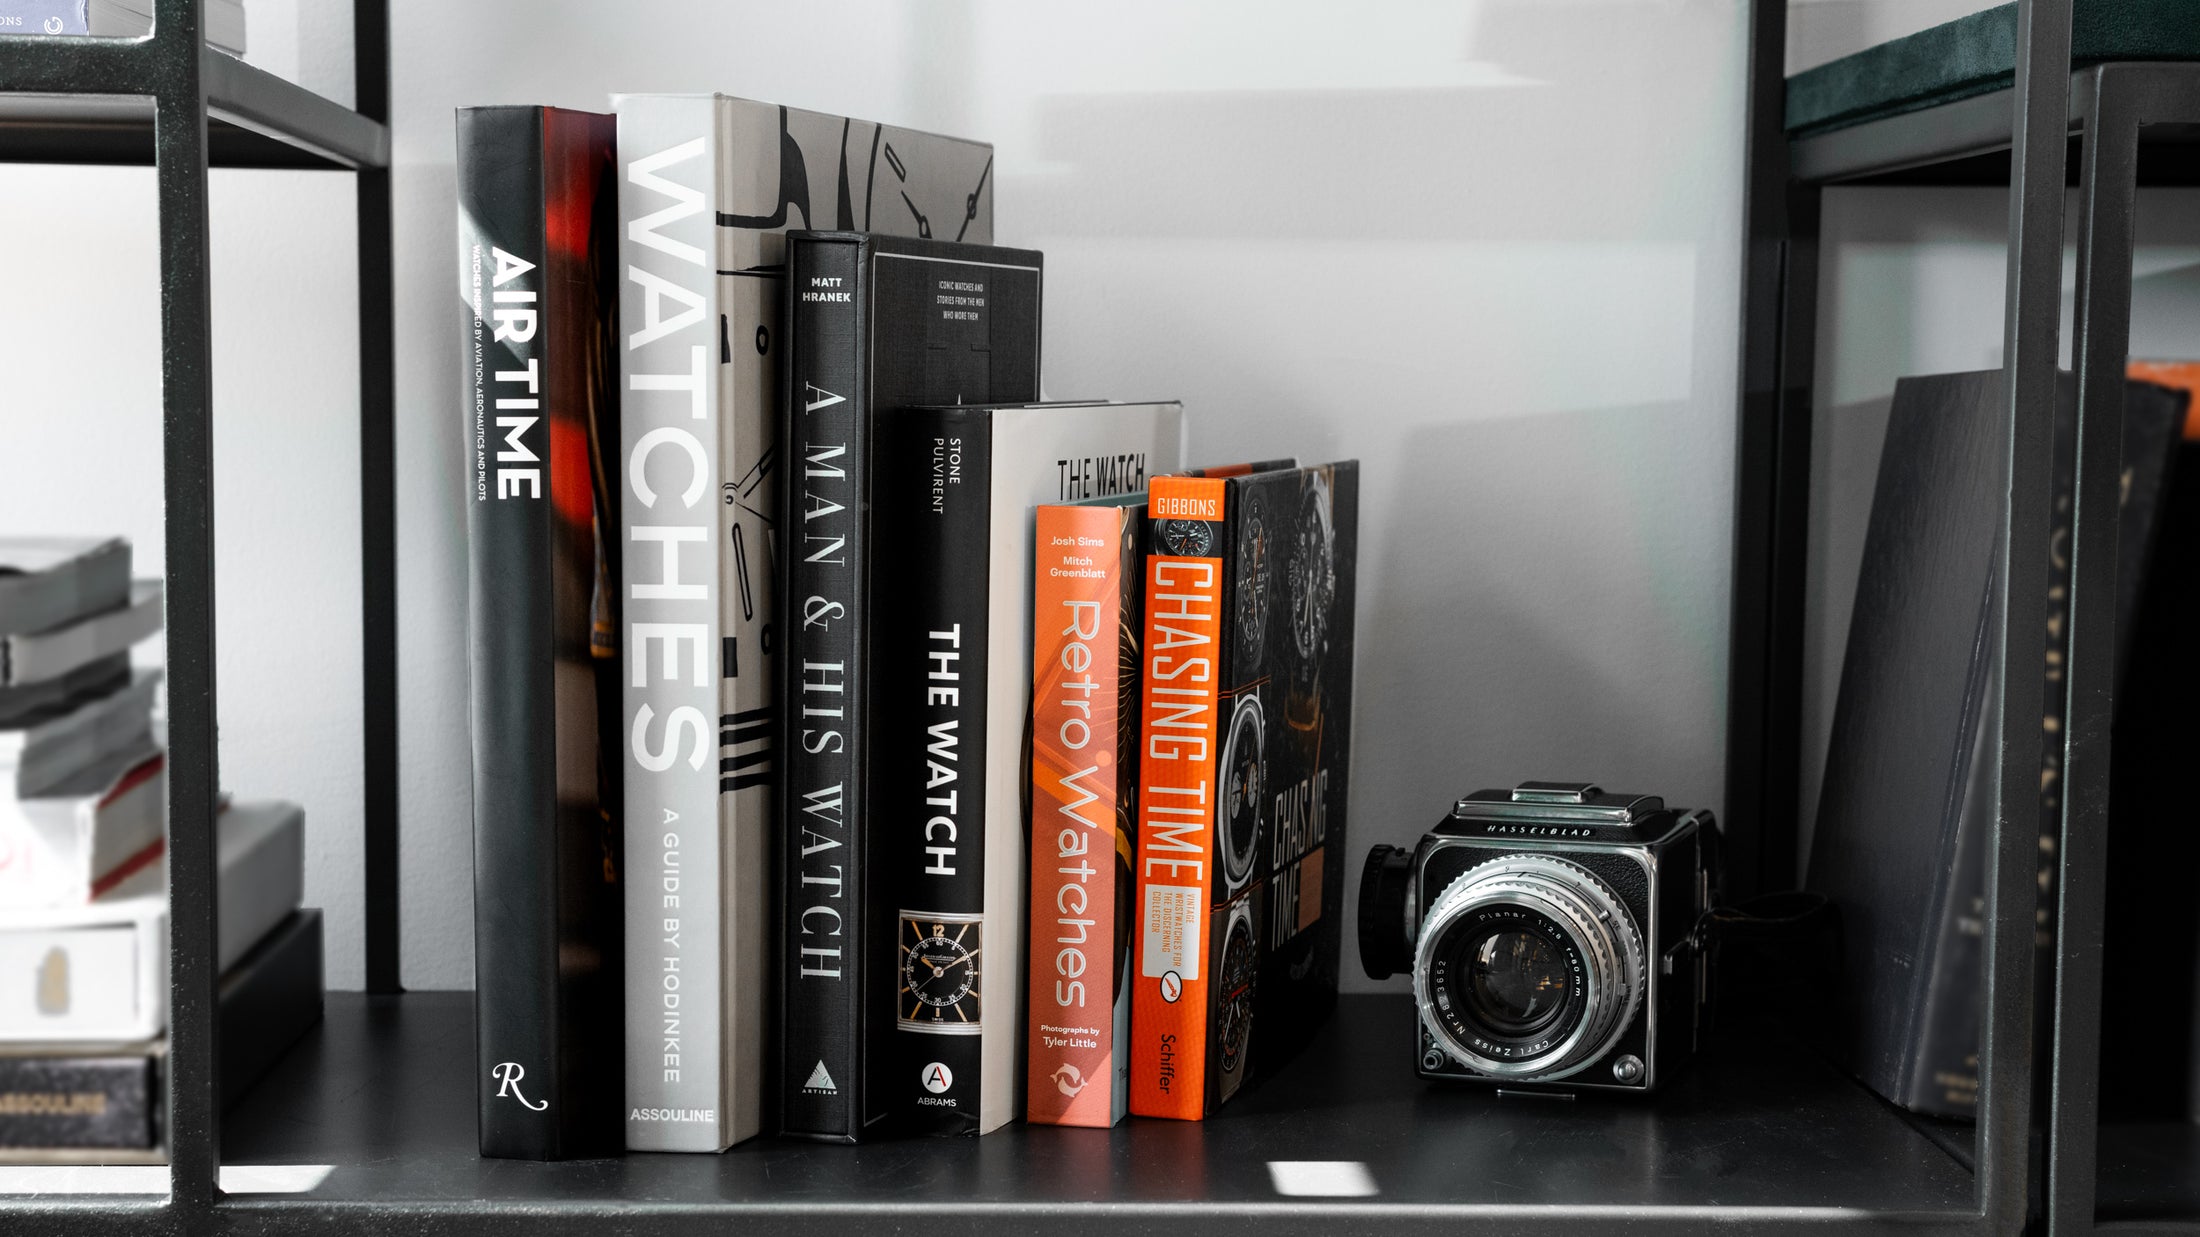 The Best Books for Watch Lovers